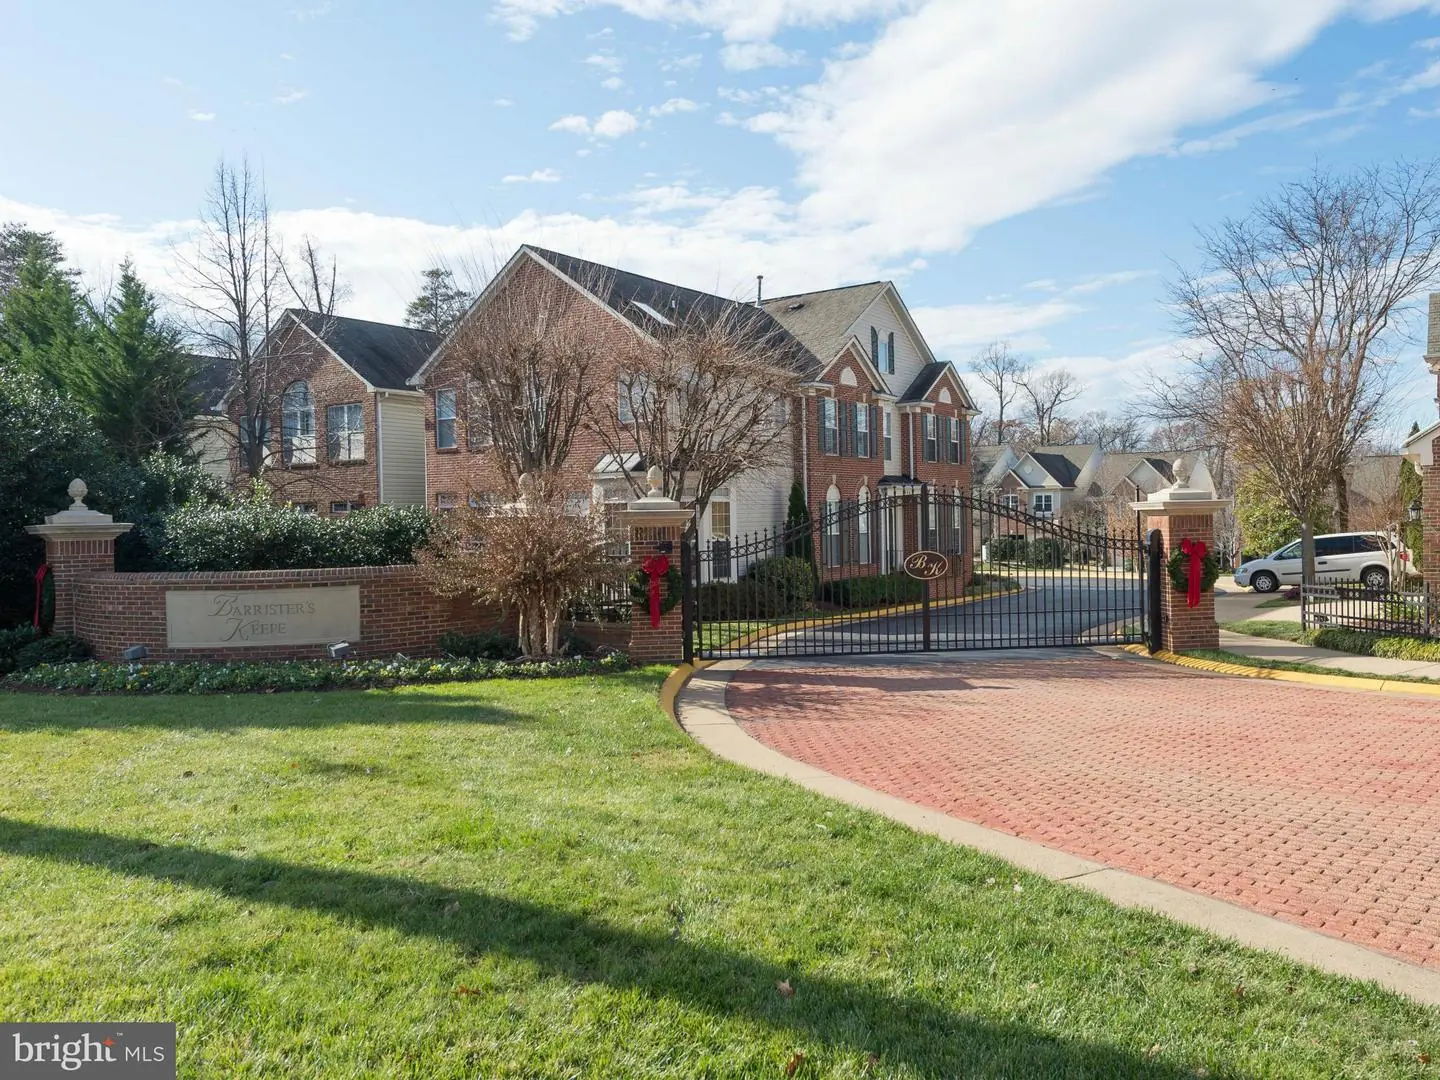 1003269524-300862526223-2021-09-07-15-12-12  |   | Fairfax Delaware Real Estate For Sale | MLS# 1003269524  - Best of Northern Virginia